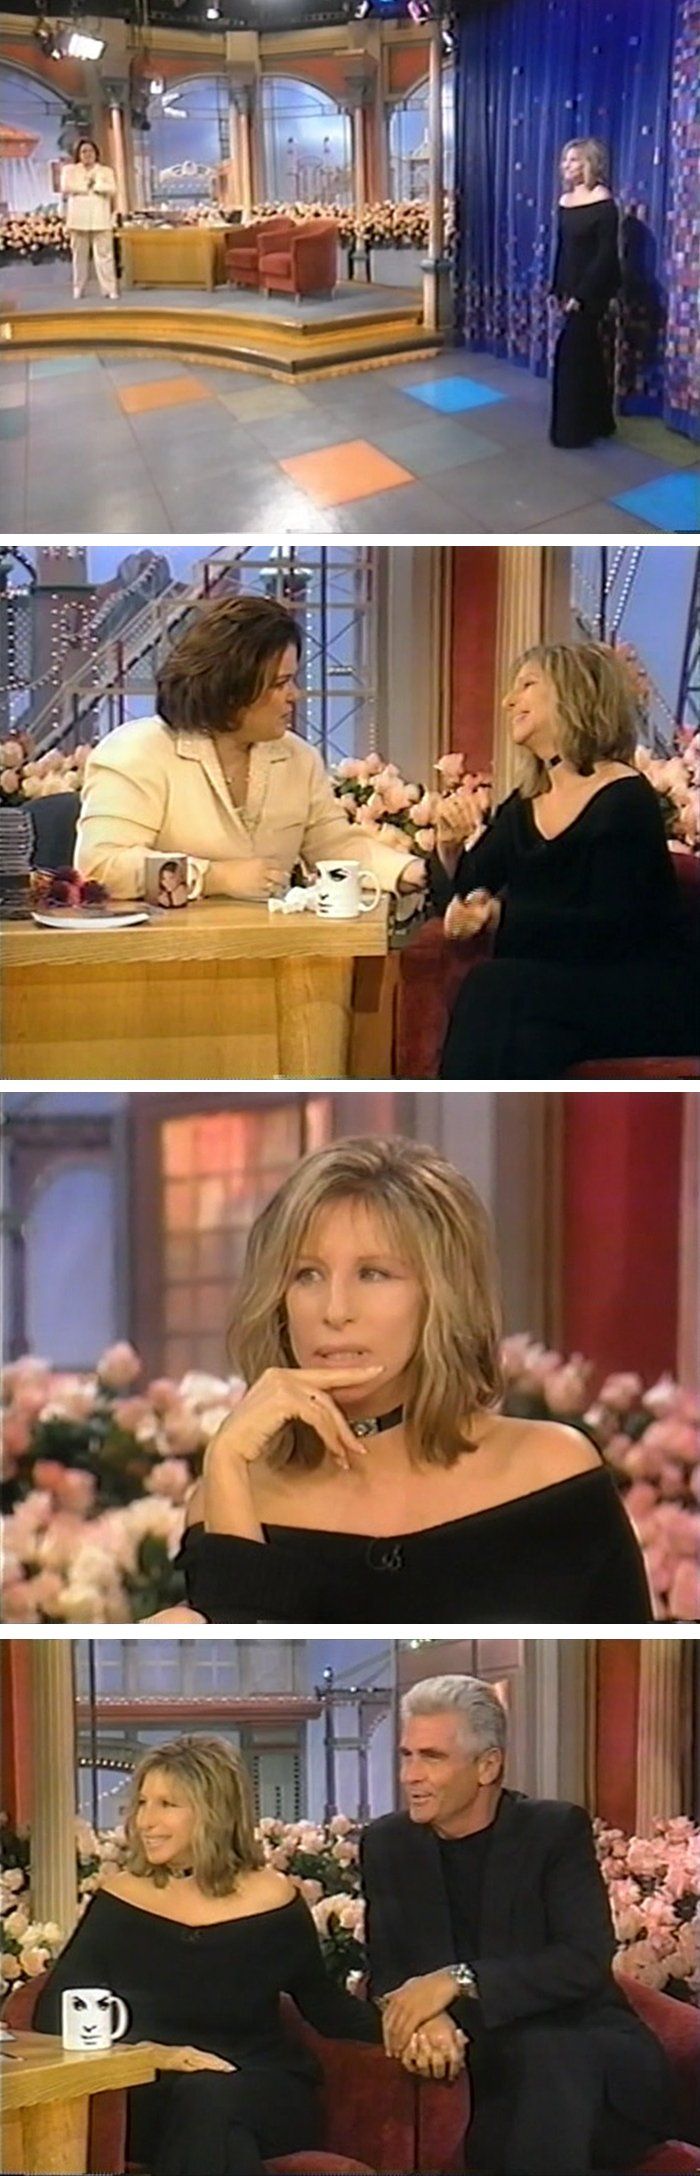 Images of Barbra Streisand on the Rosie O'Donnell Show.